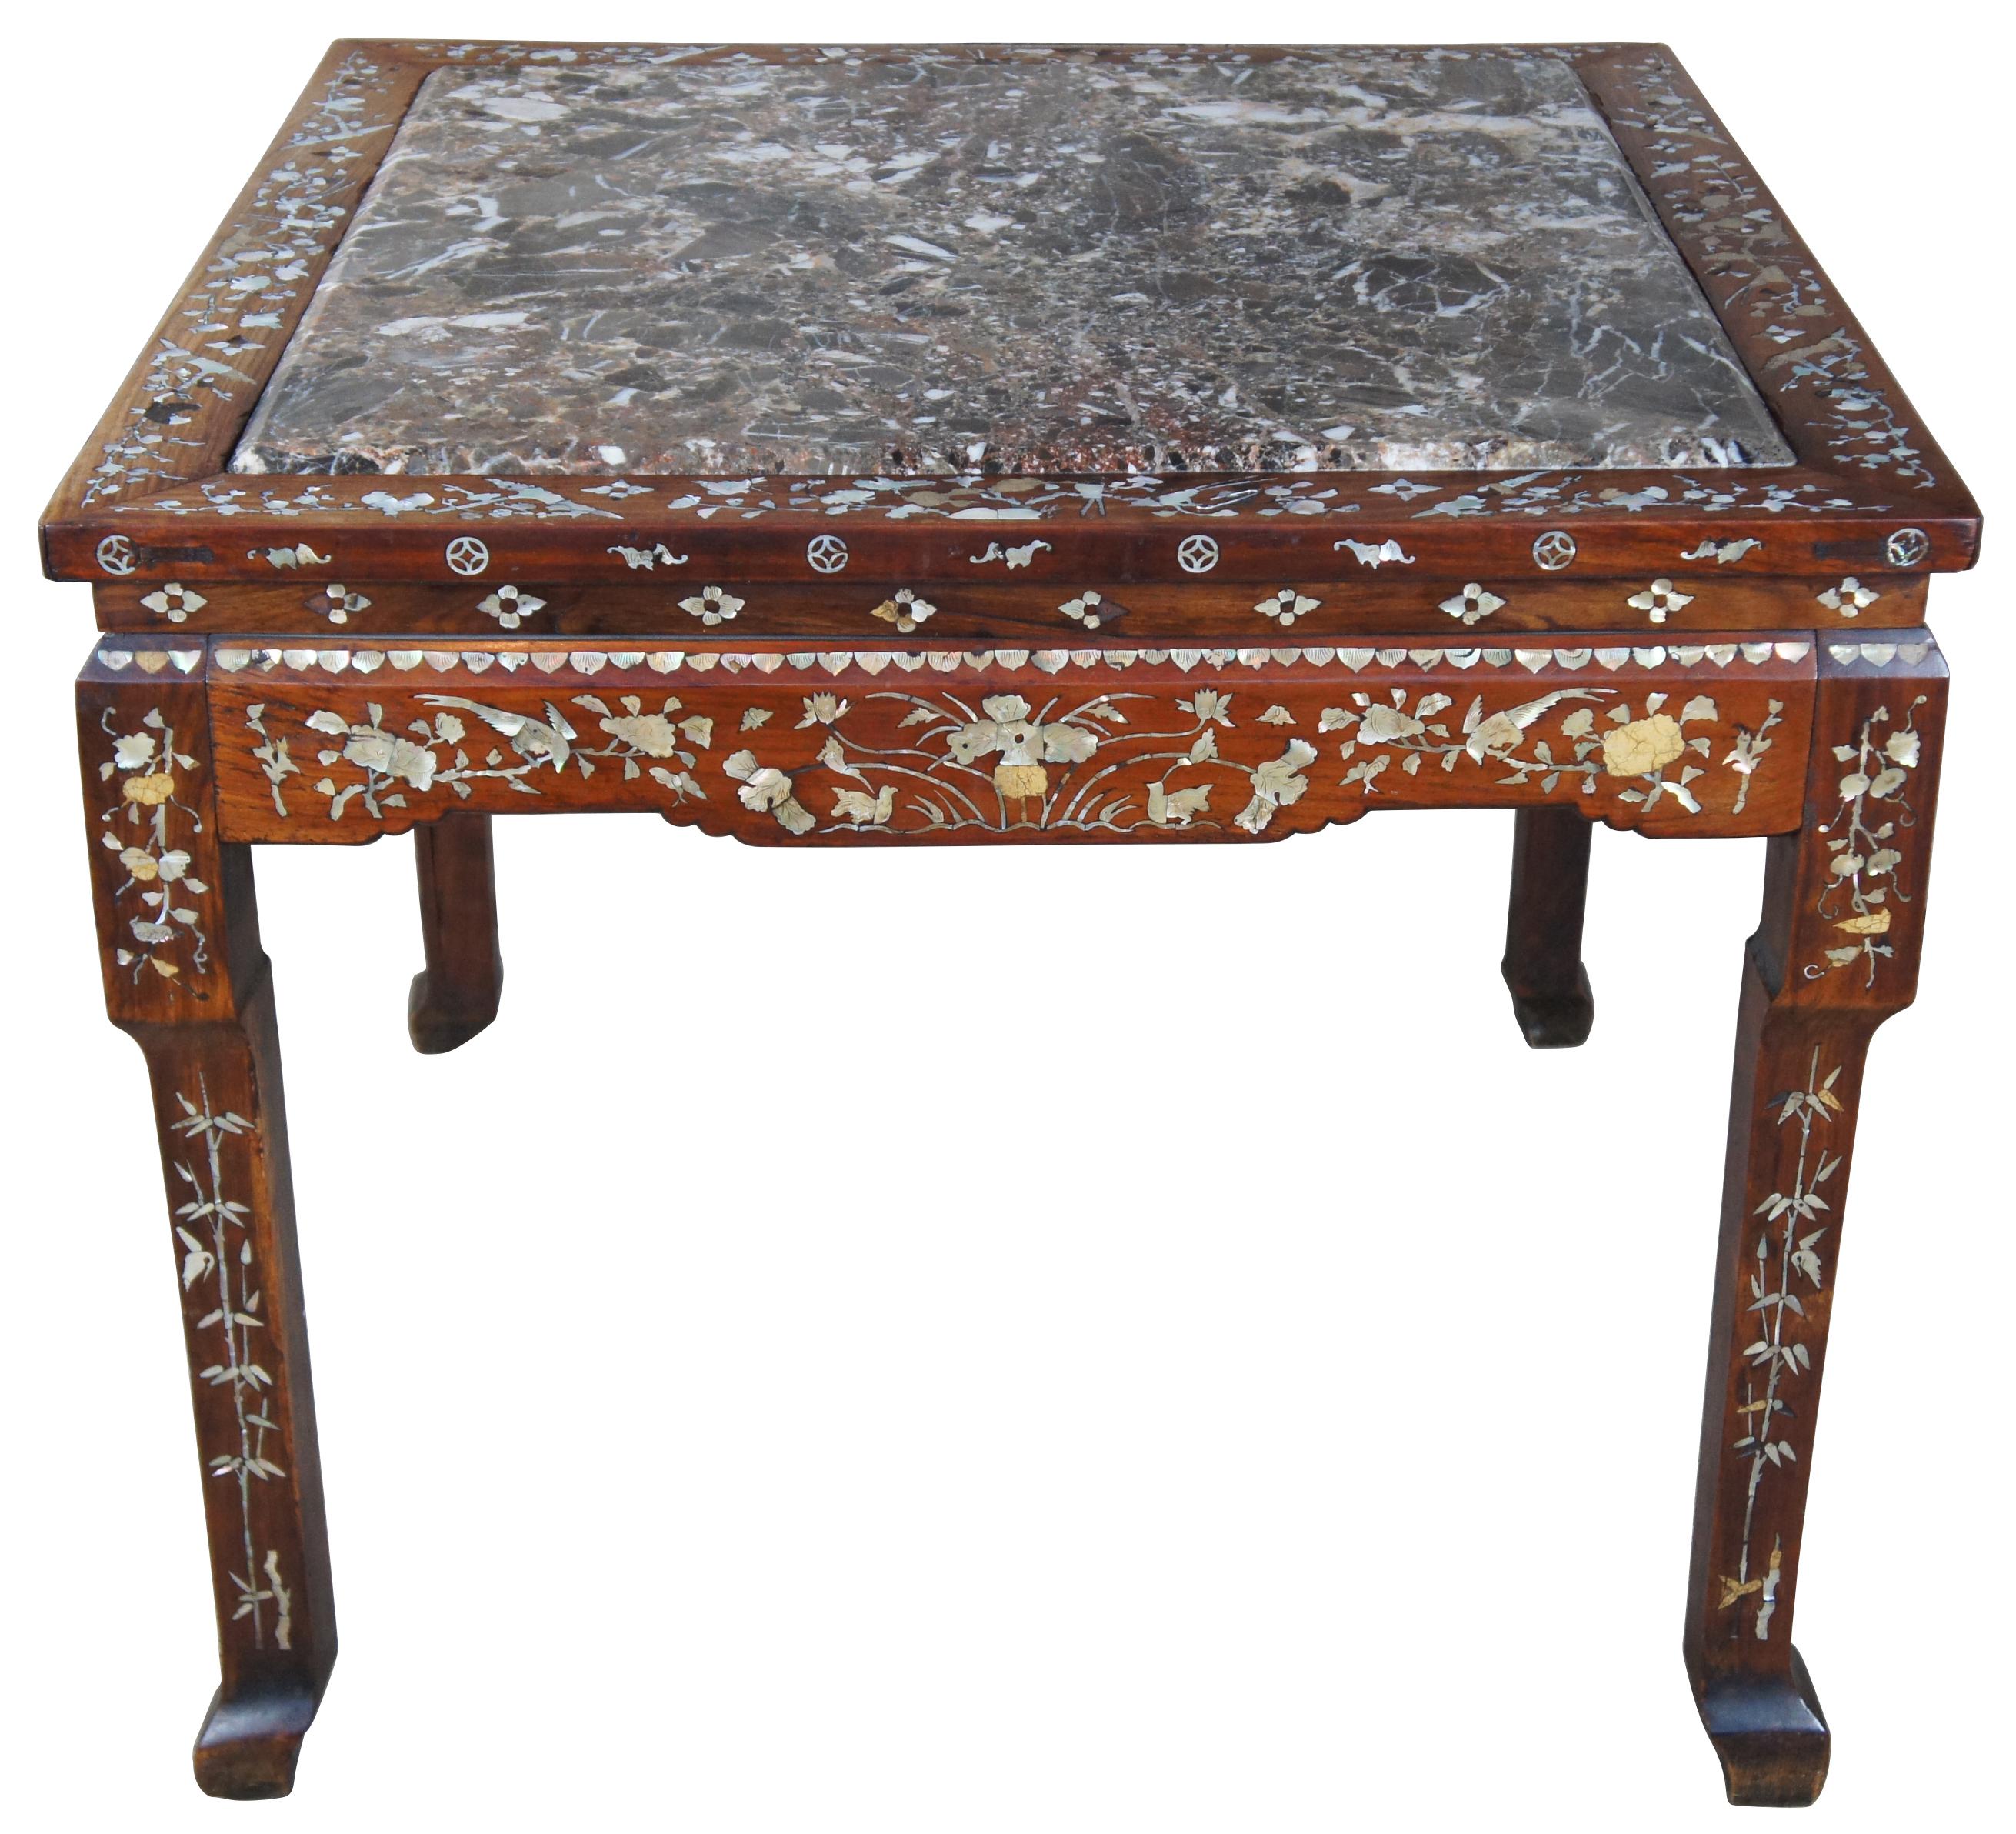 19th century Rosewood Mother of Pearl inlaid game or breakfast table with marble top insert. Intricately detailed with bamboo shoots along the legs, flowers and birds along the apron, and other decorative motifs.
      